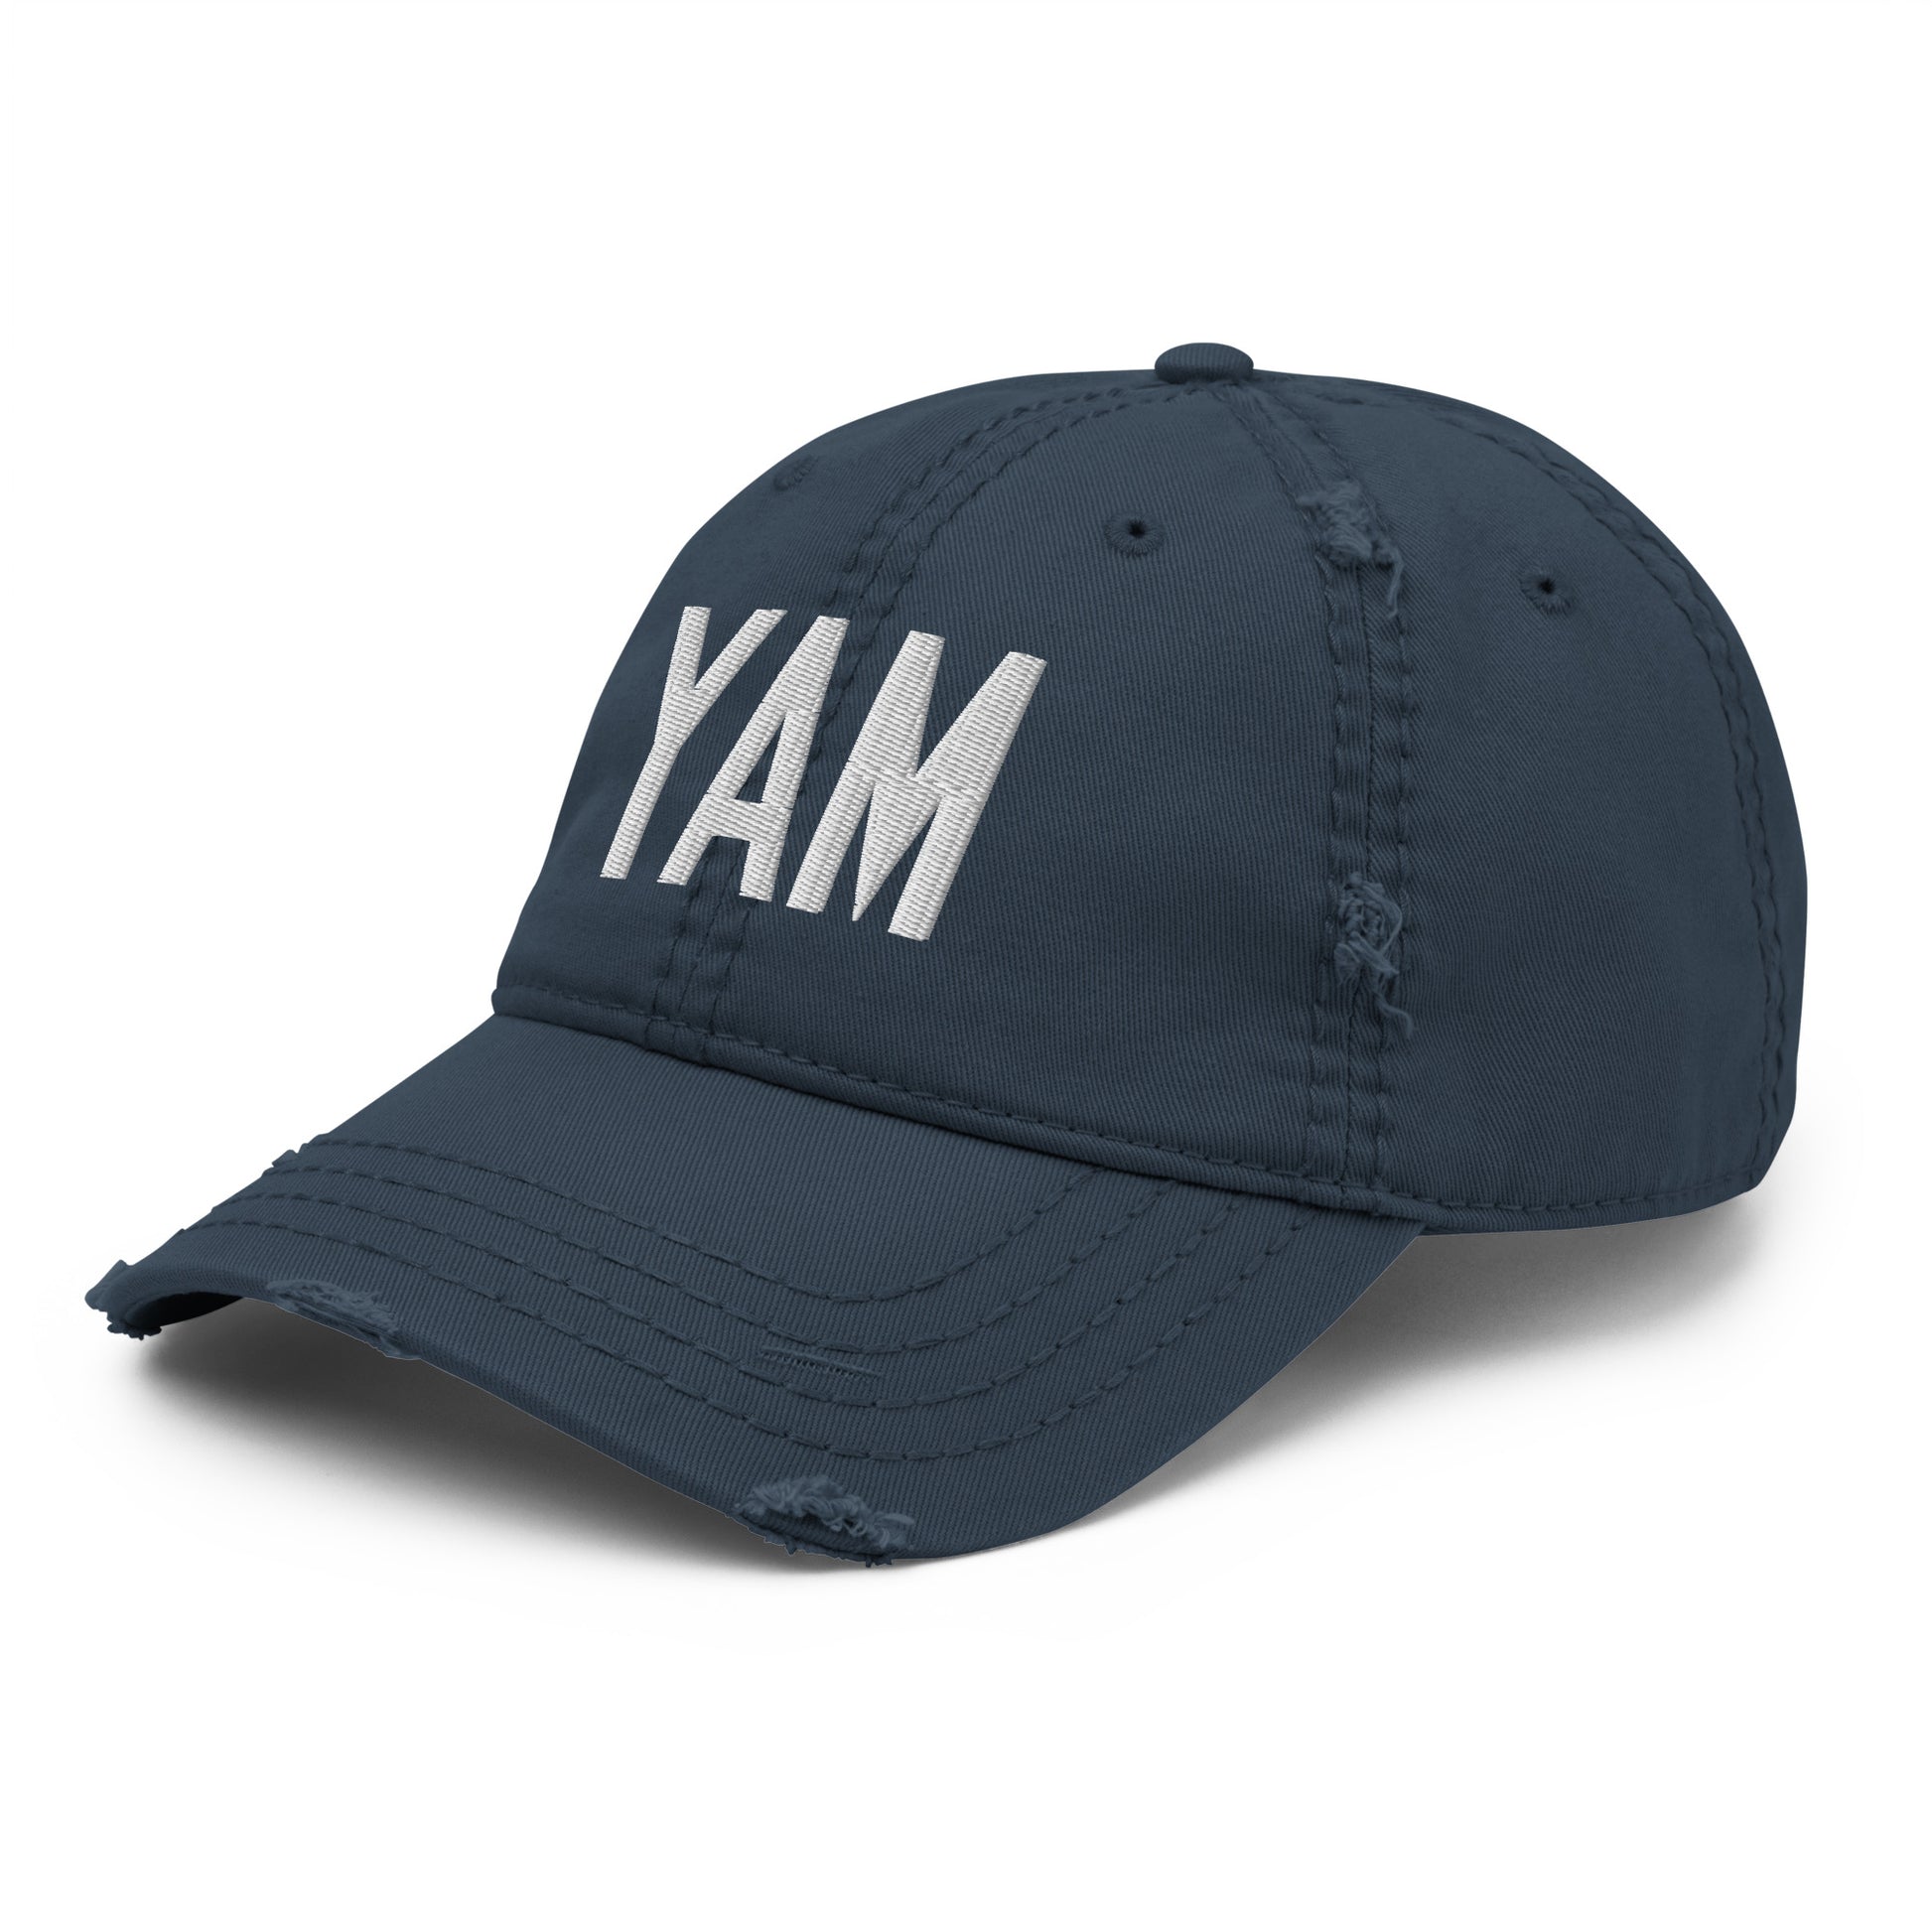 Airport Code Distressed Hat - White • YAM Sault-Ste-Marie • YHM Designs - Image 01